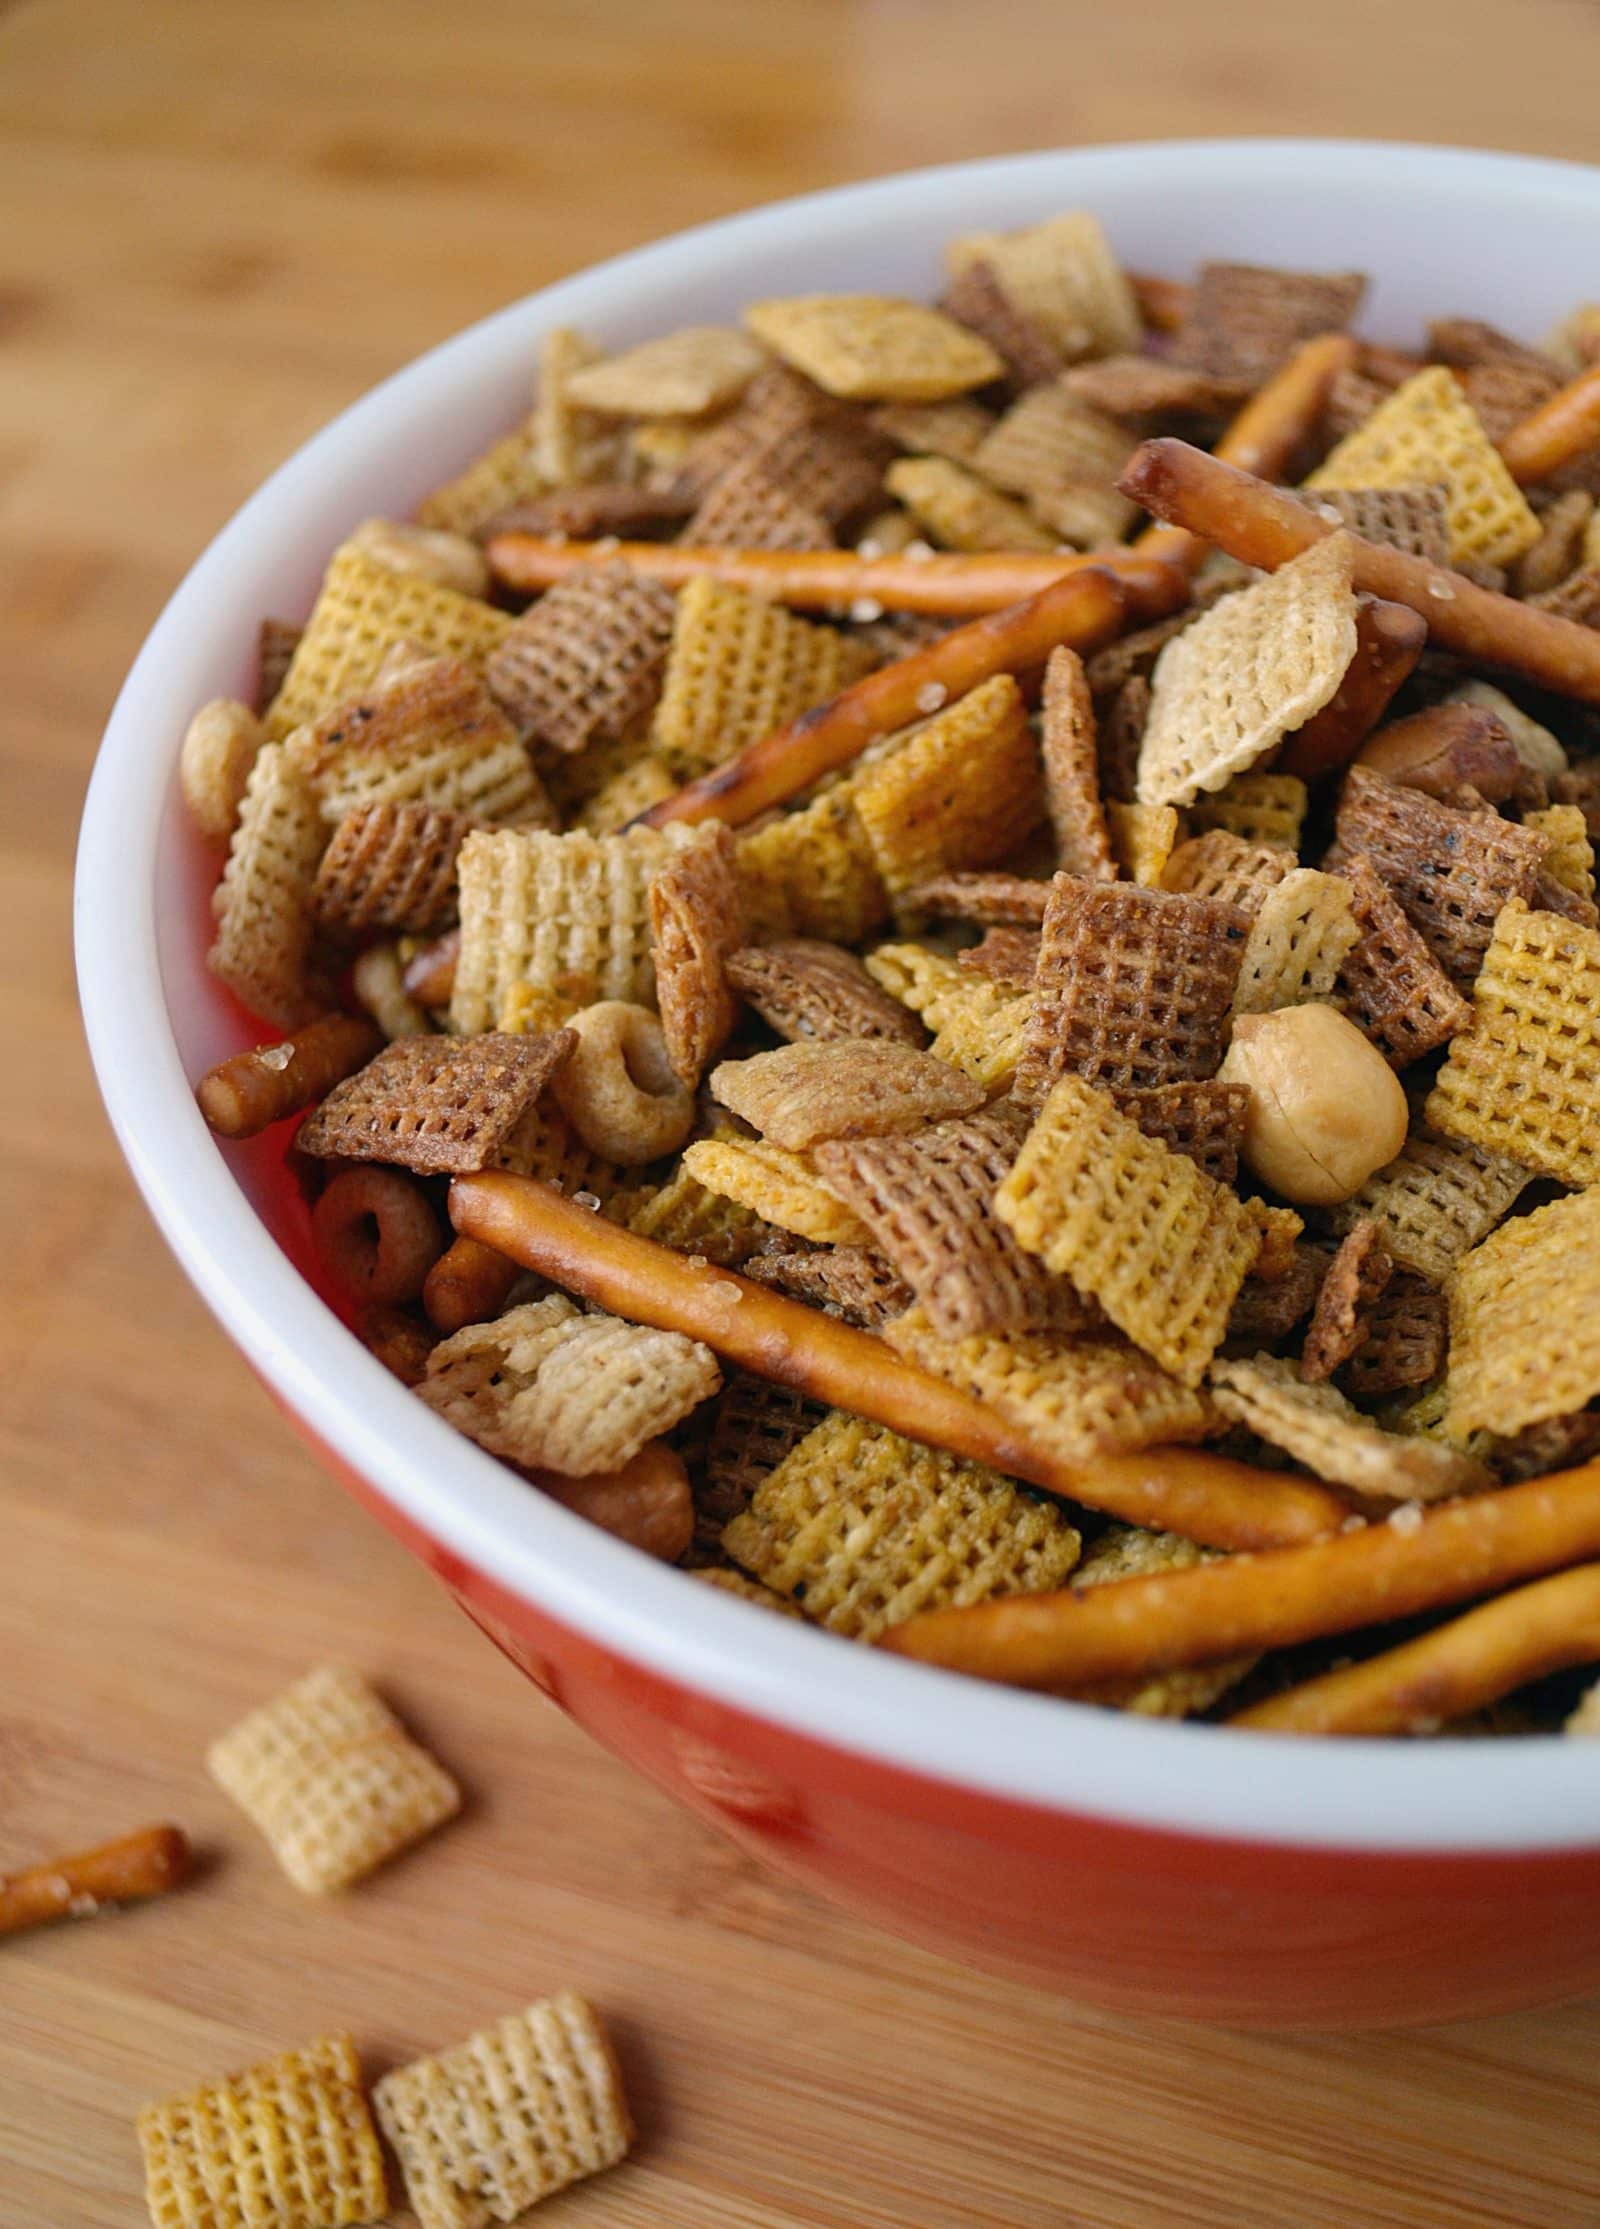 Original Chex Mix Party Snack Recipe From the 1950s